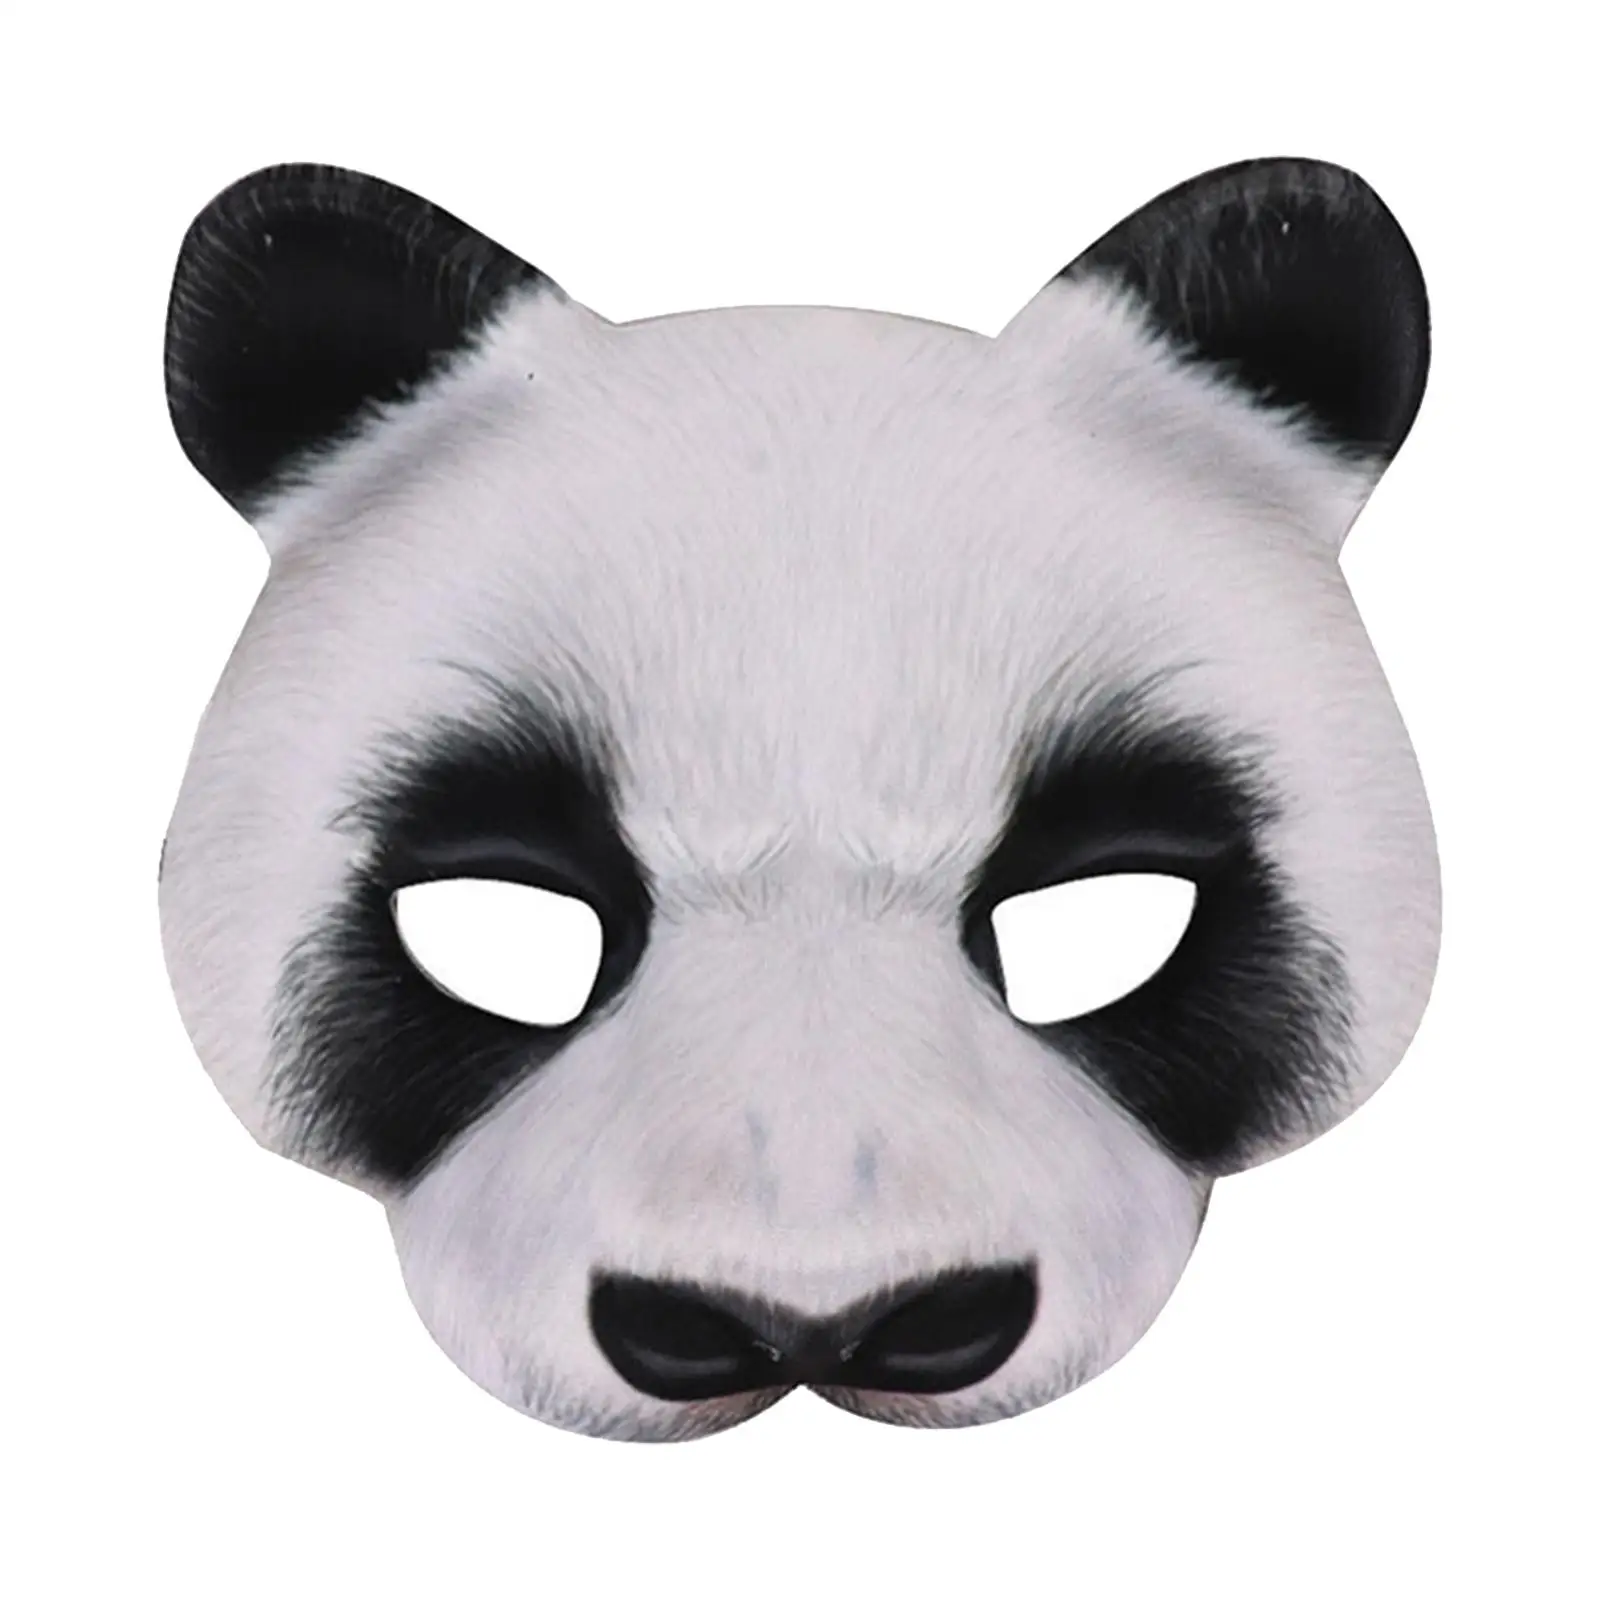 Panda Masks Cosplay Headgear Animal Mask with Elastic Band Clothes Decor Half Face Mask for Adults Men Women Halloween Prom